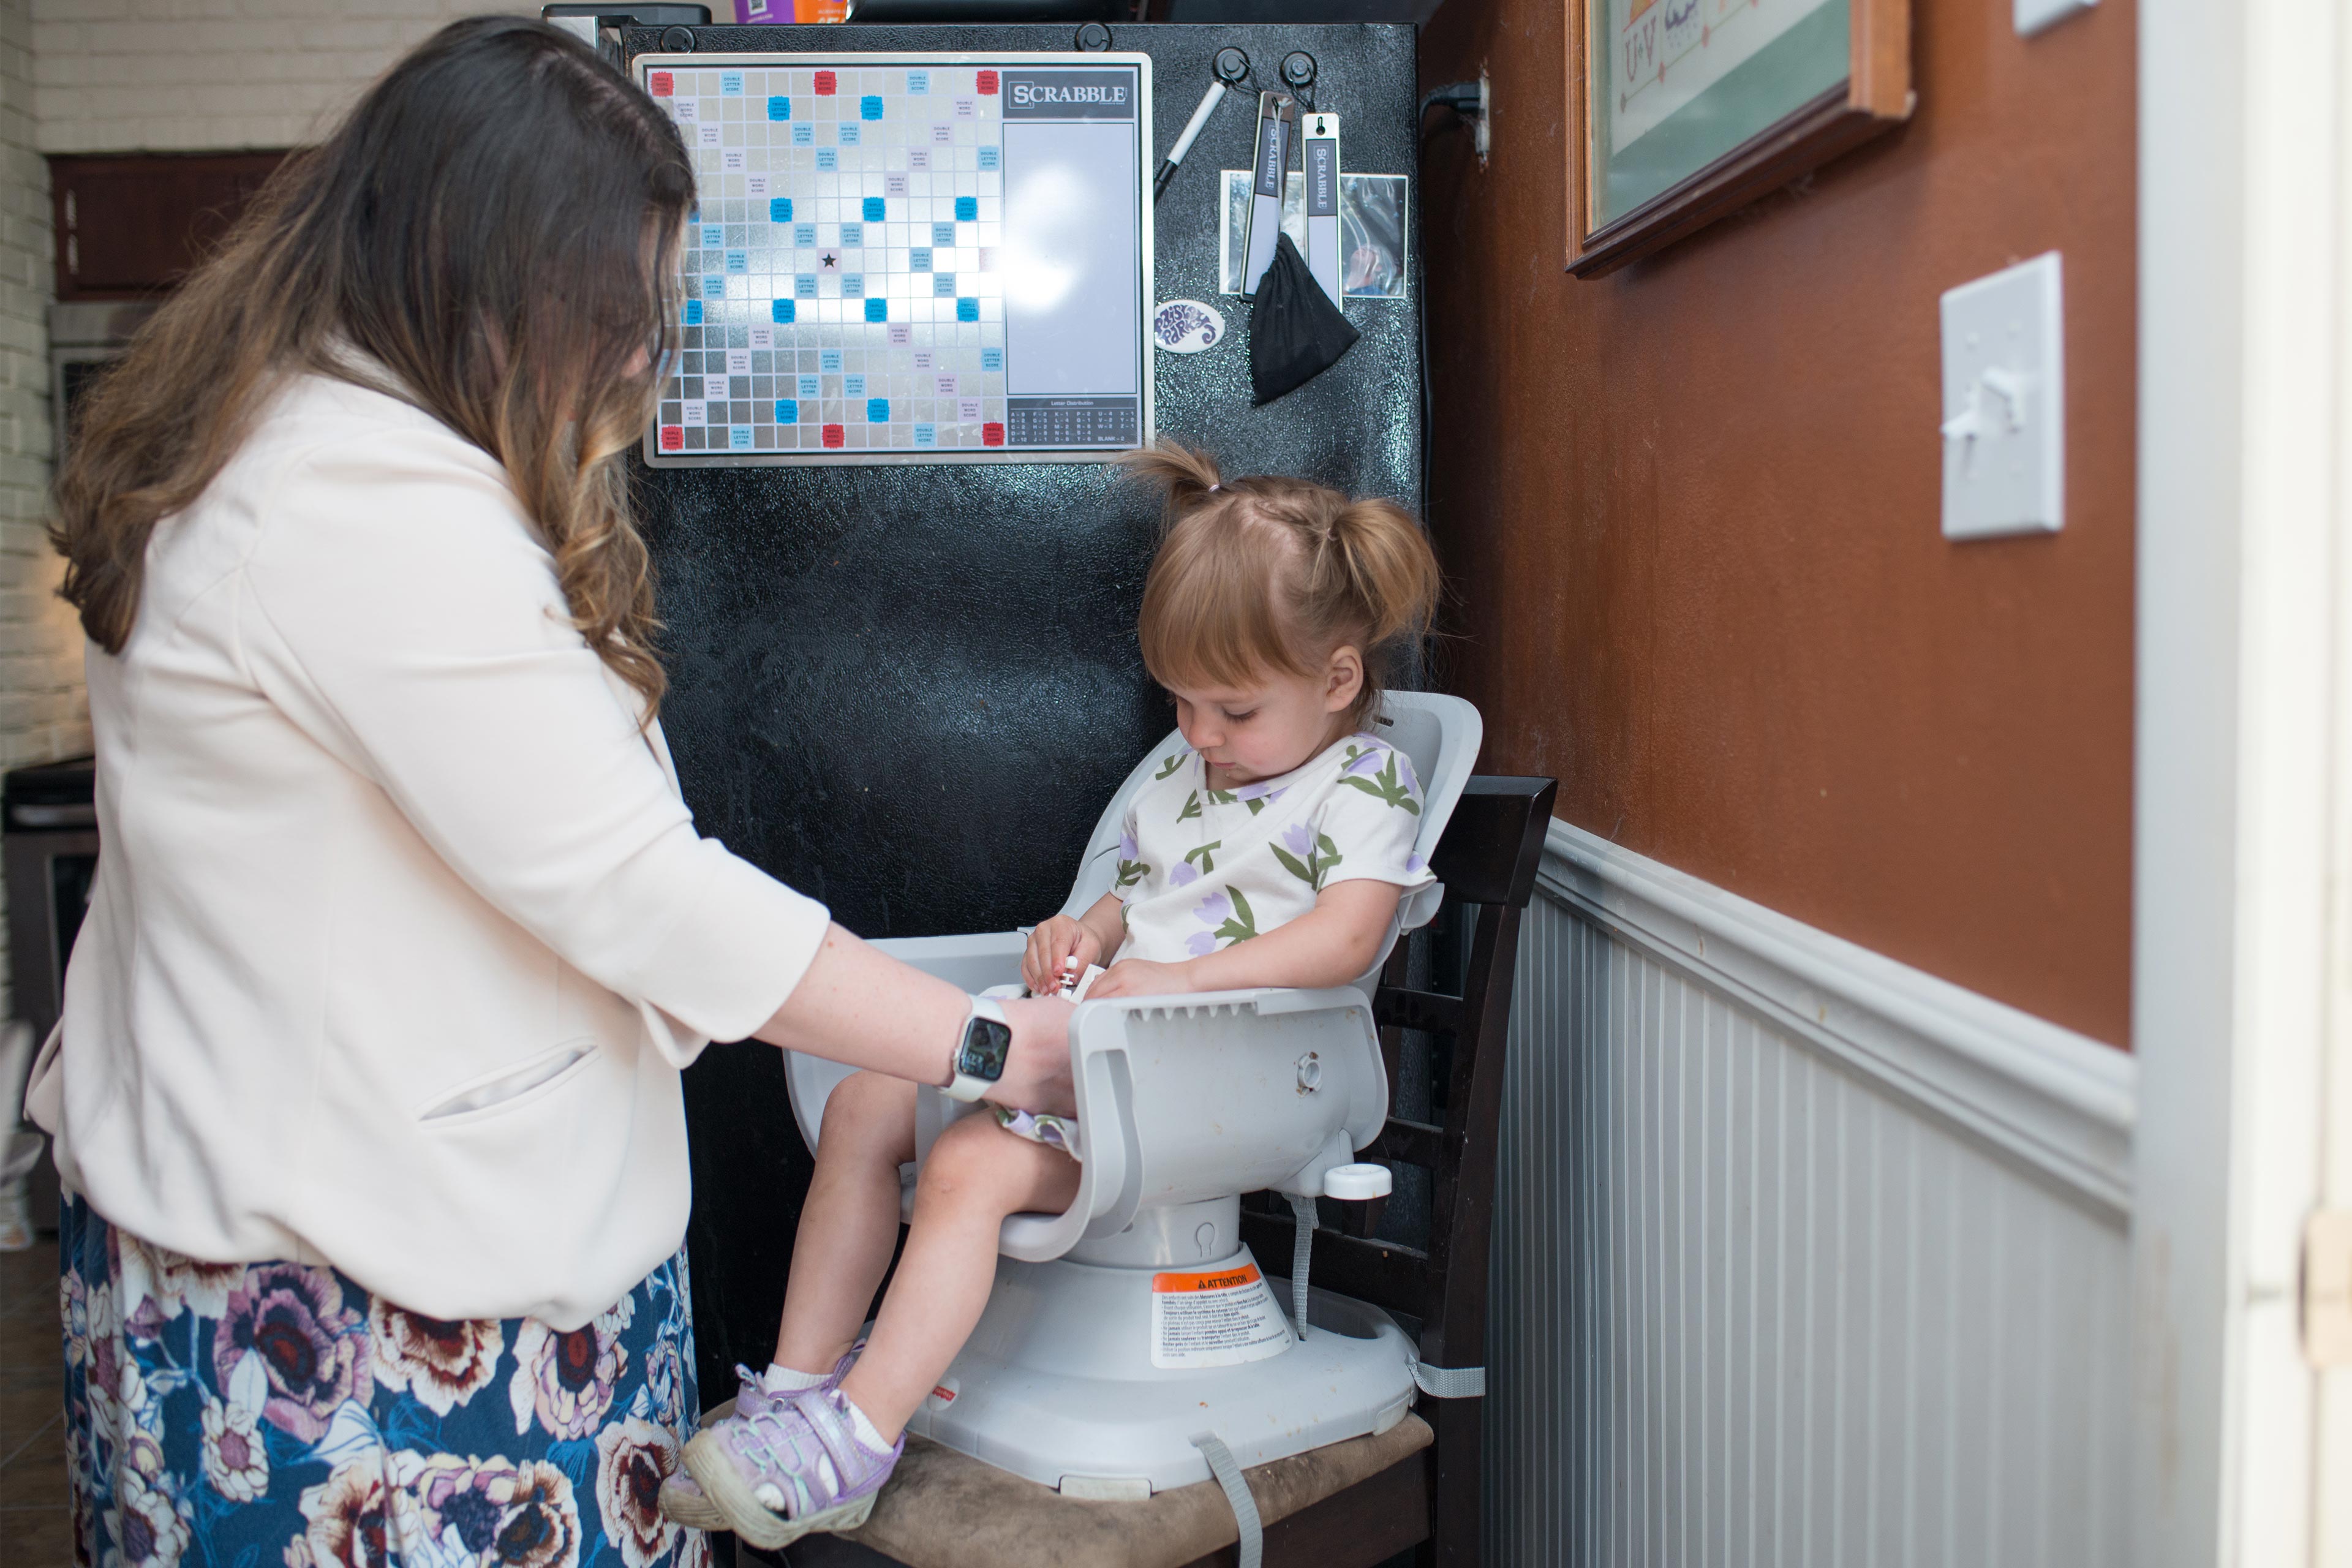 A photo of a mother strapping her young daughter in a high chair.